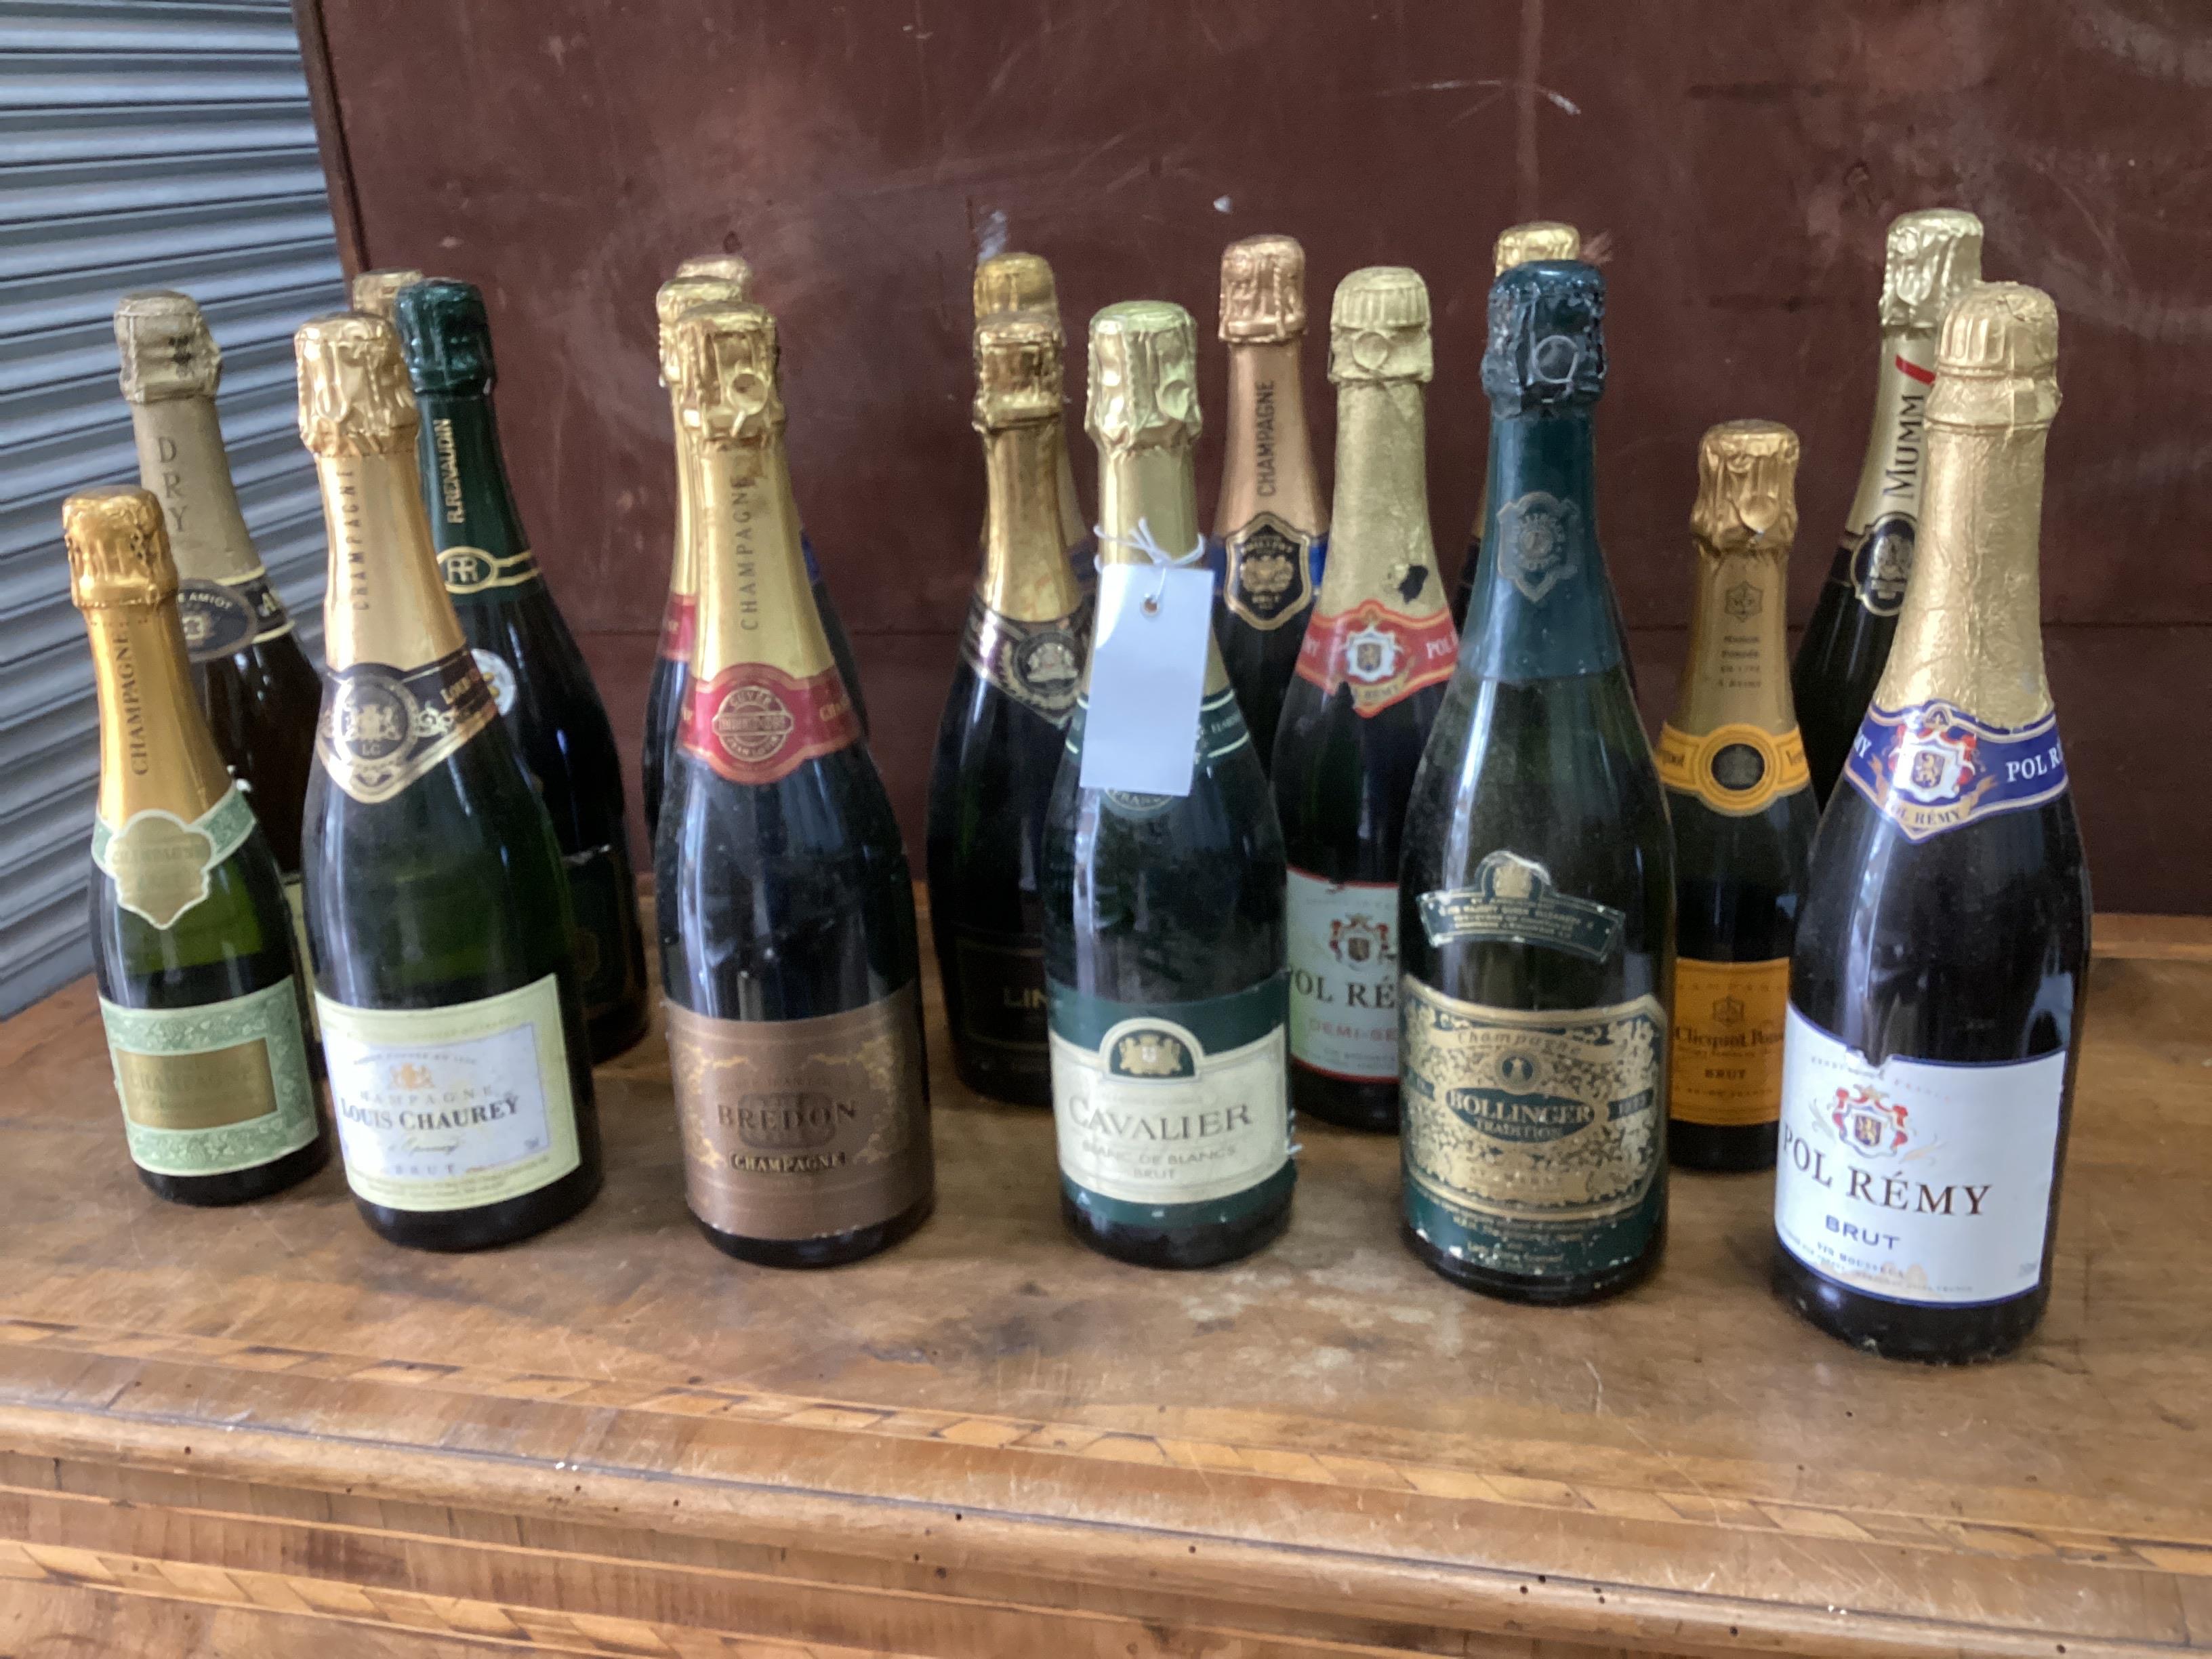 18 bottles of champagne and sparkling wine to include Bollinger, Pol Remy, Mumm and Brendon.                                                                                                                                